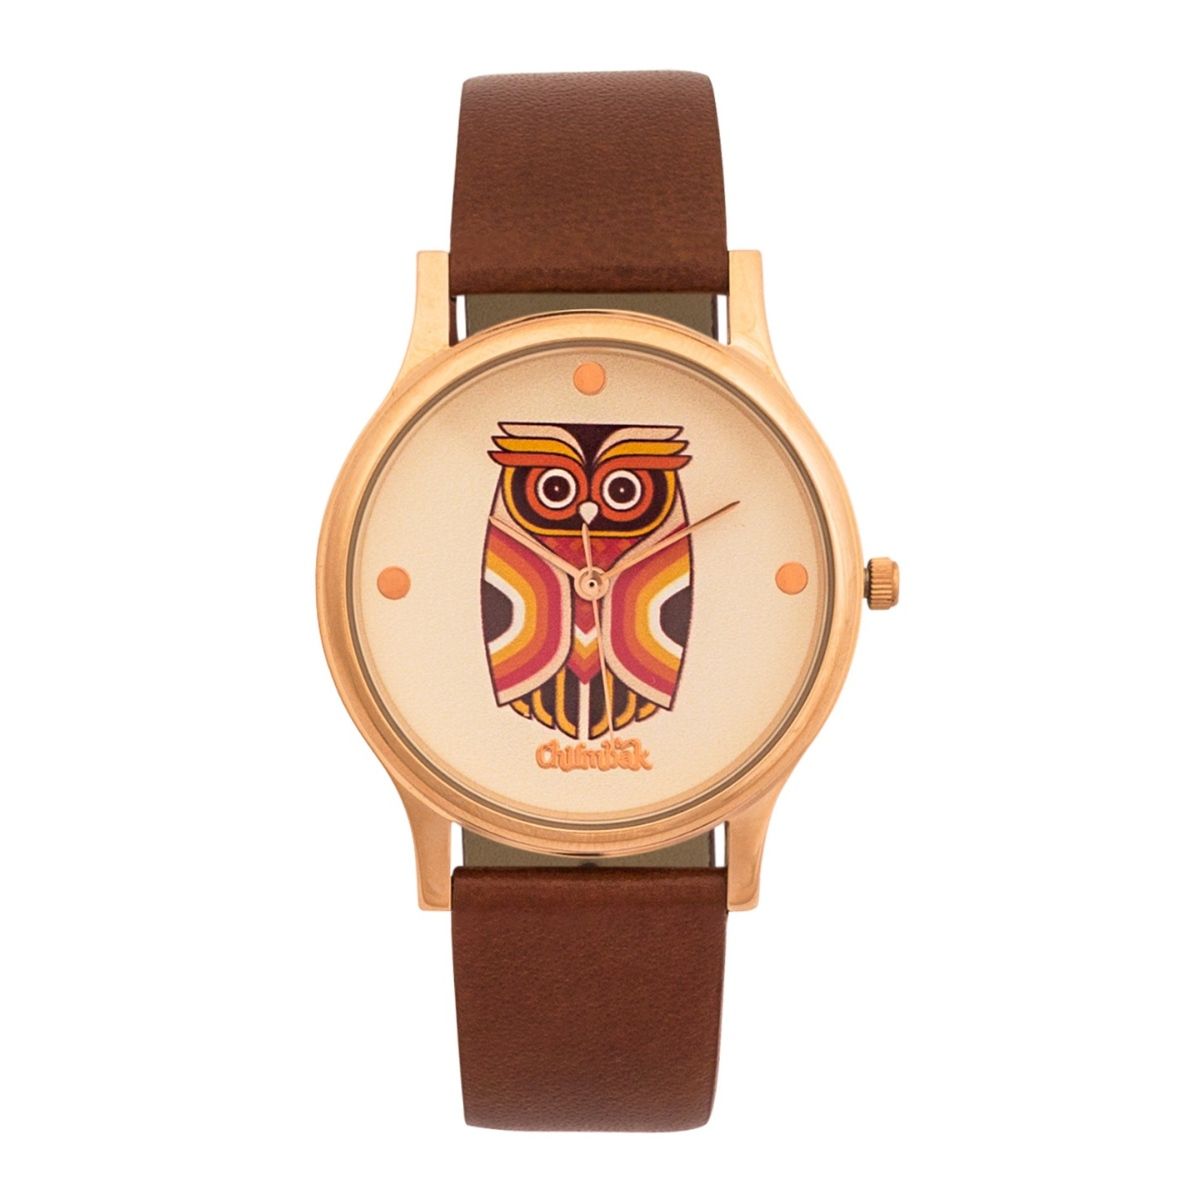 The best Chumbakdesign Watches & Jewellery TEAL By Chumbak Decorative  Elephant Wrist Watch.Buy online at Chumbak Shop and easy returns